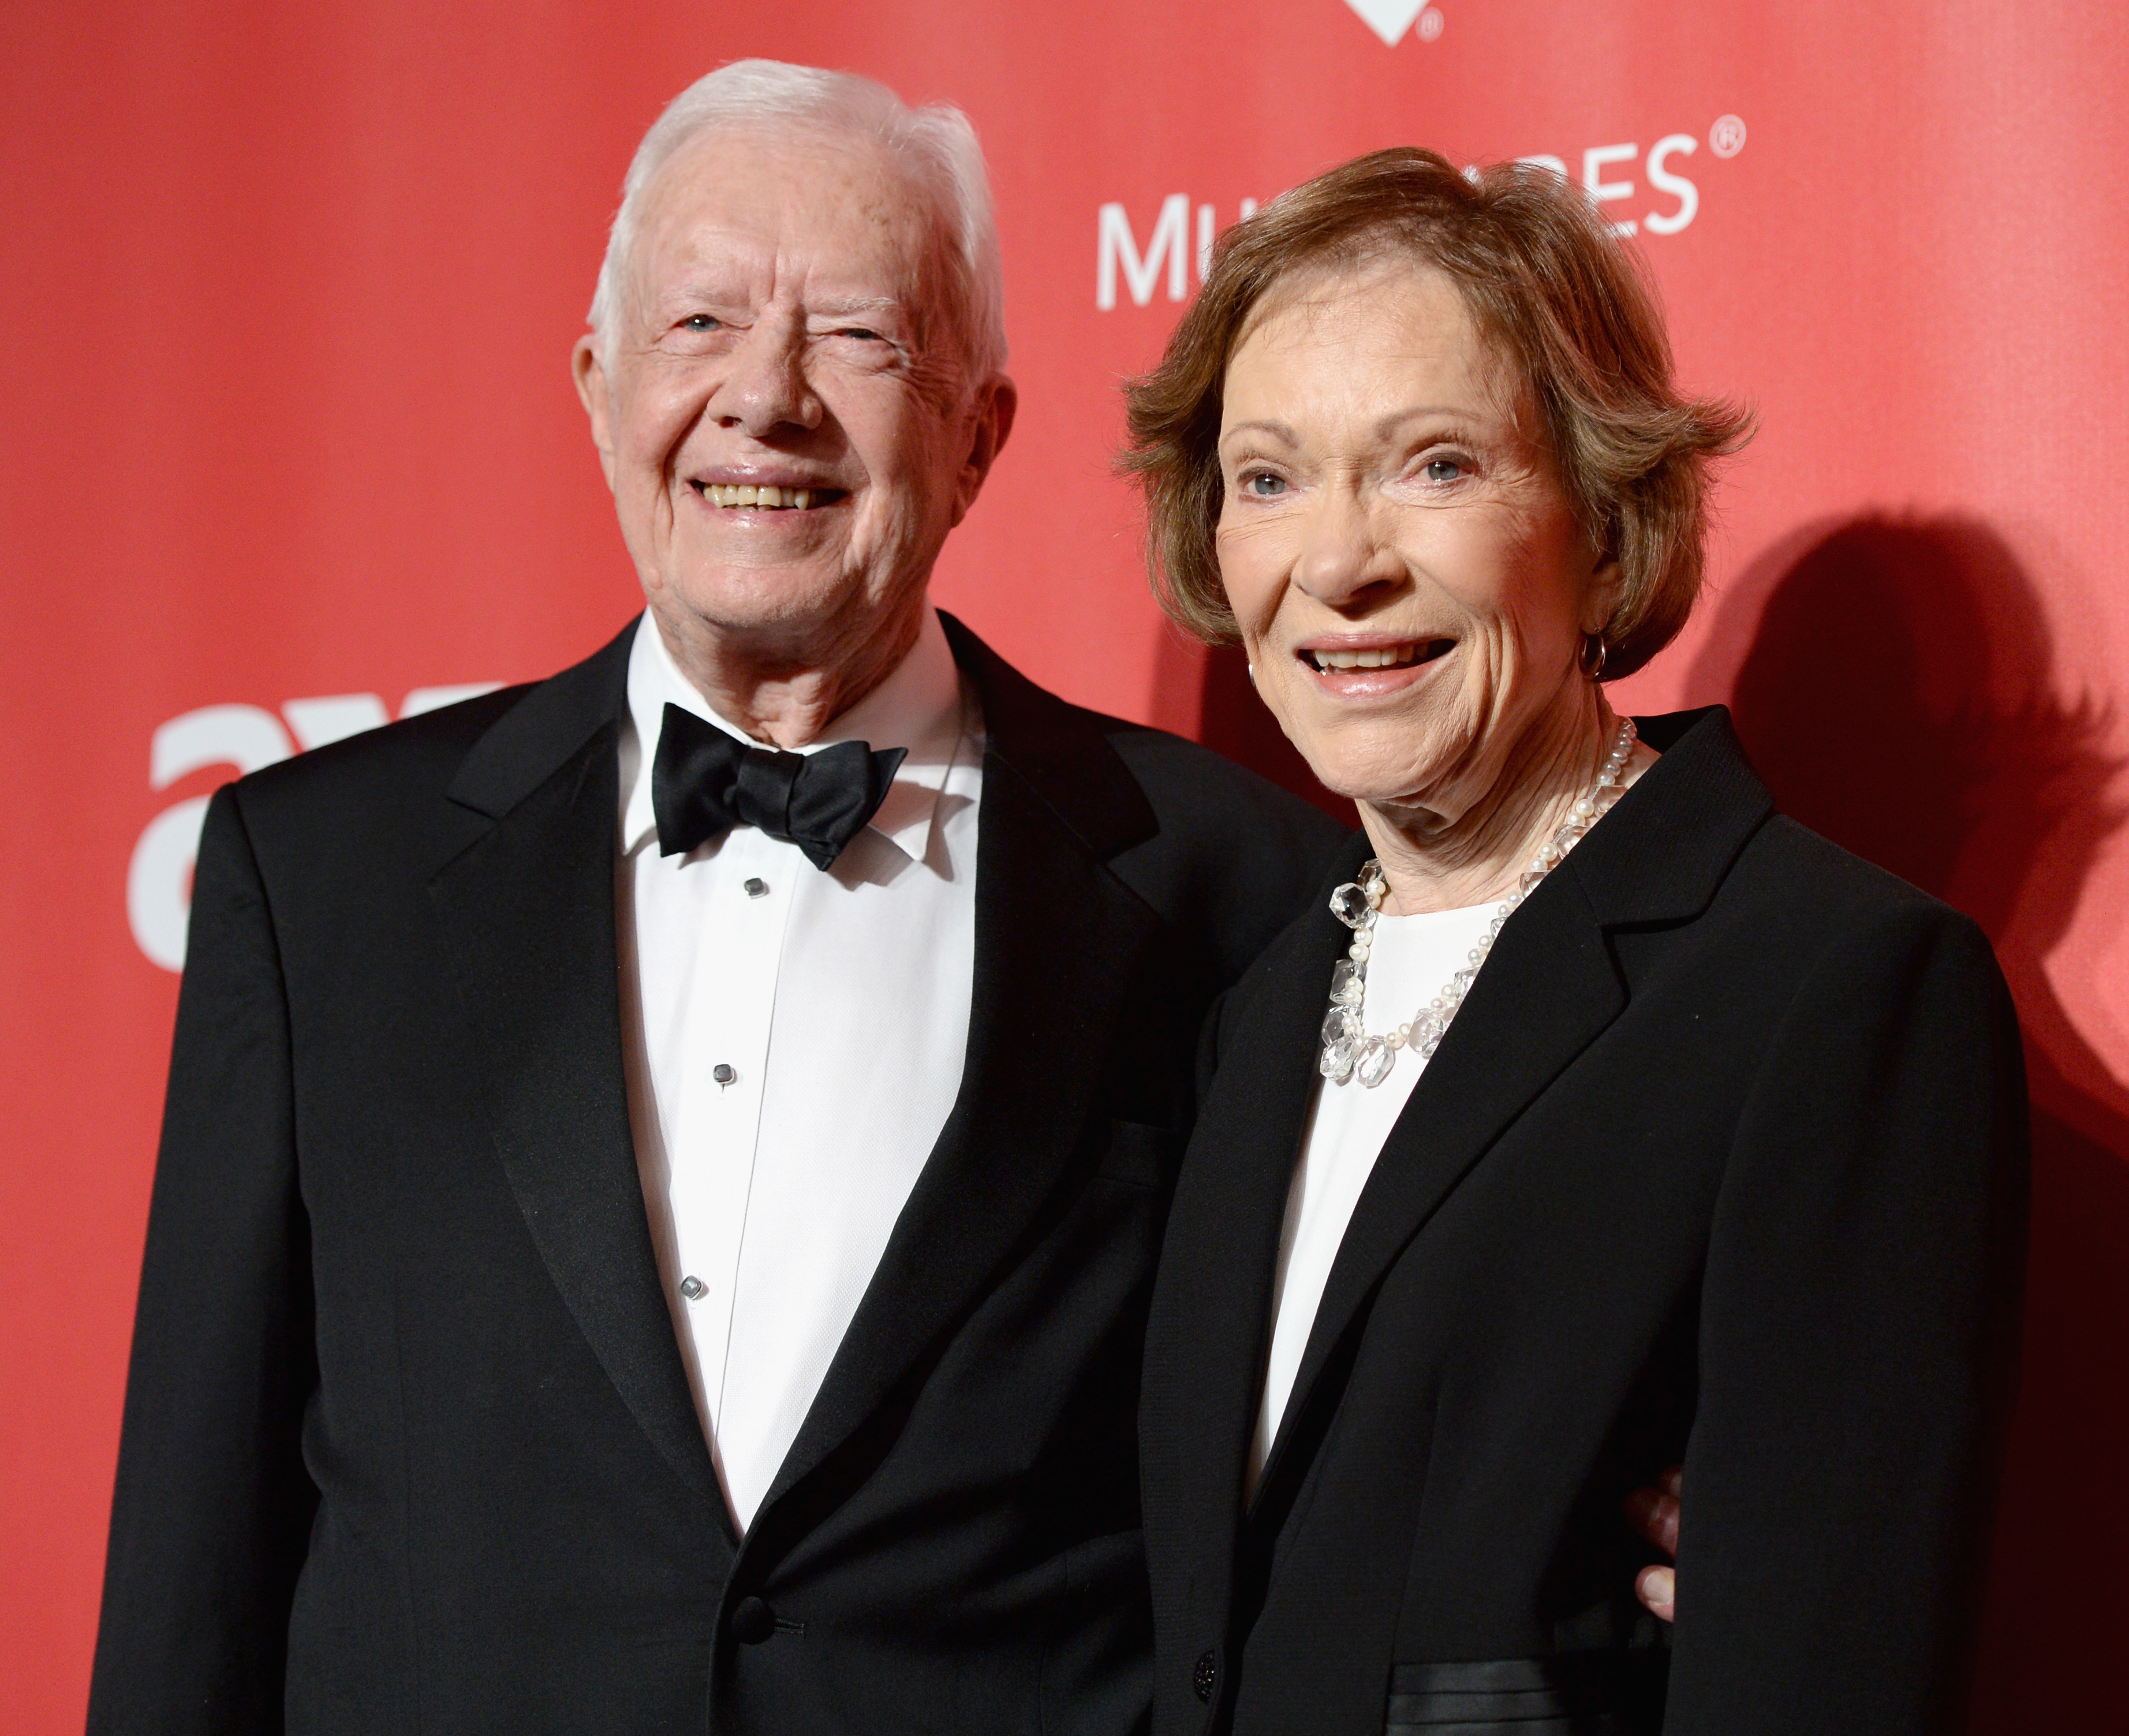 Former U.S. President Jimmy Carter and former U.S. First Lady Rosalynn Carter at the 25th anniversary MusiCares Person Of The Year Gala in Los Angeles, California on February 6, 2015 | Source: Getty Images